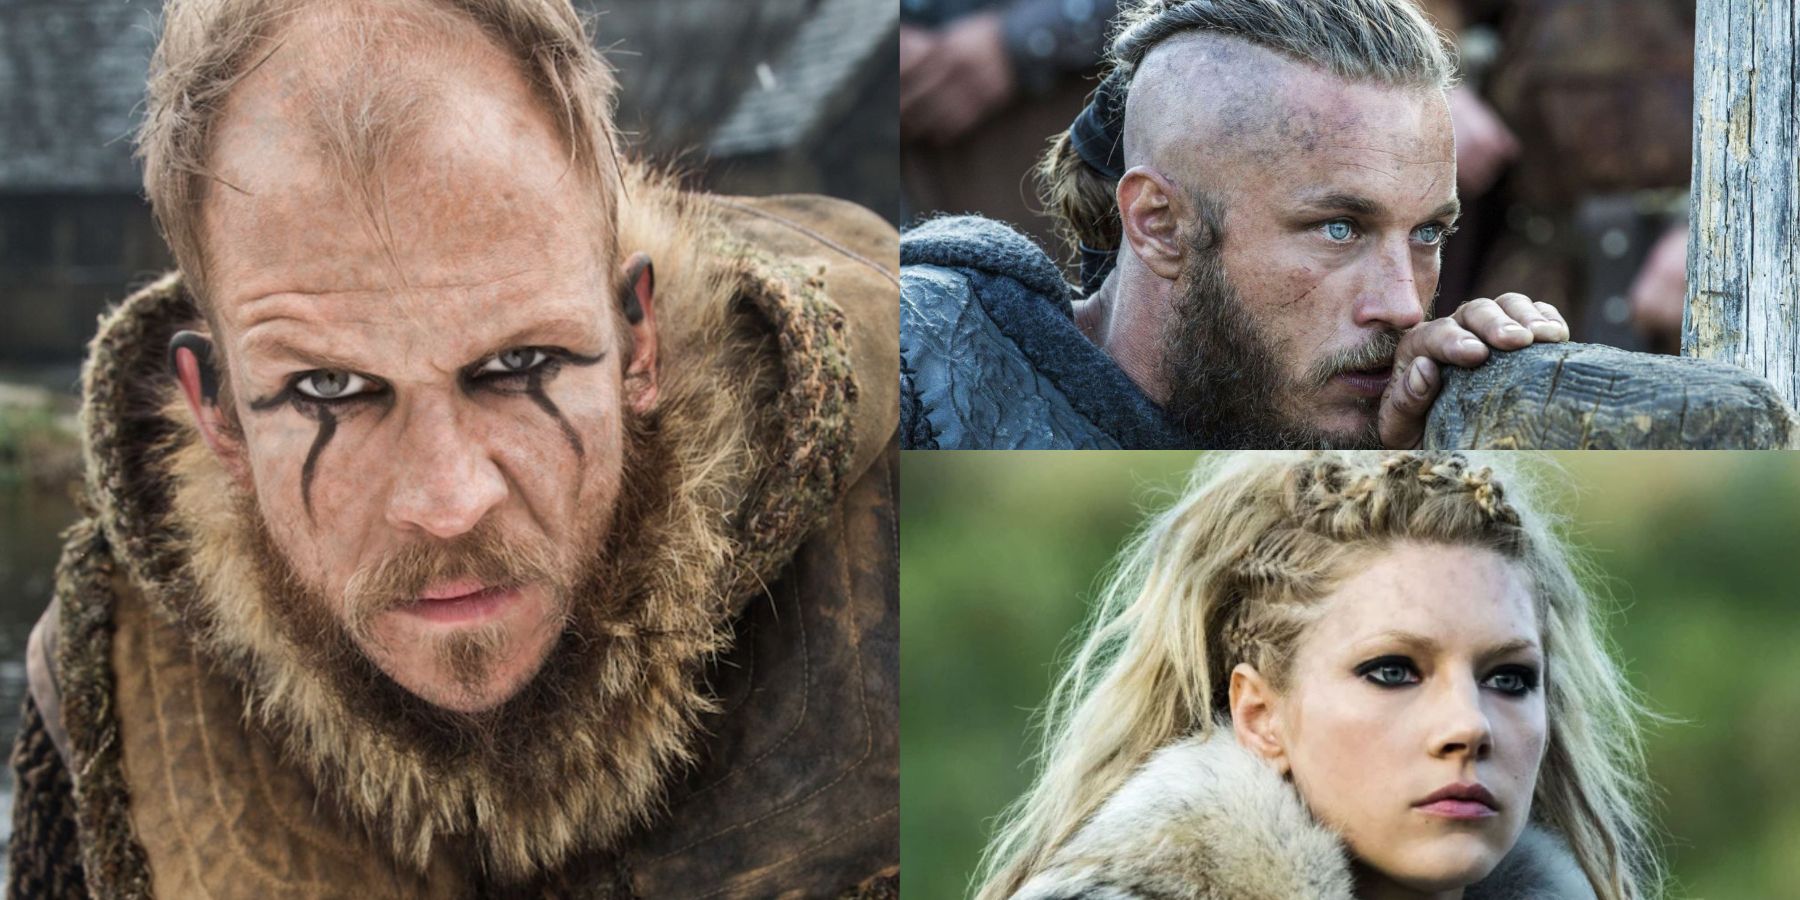 Vikings: Valhalla: Meet the Characters and Their Historic Counterparts